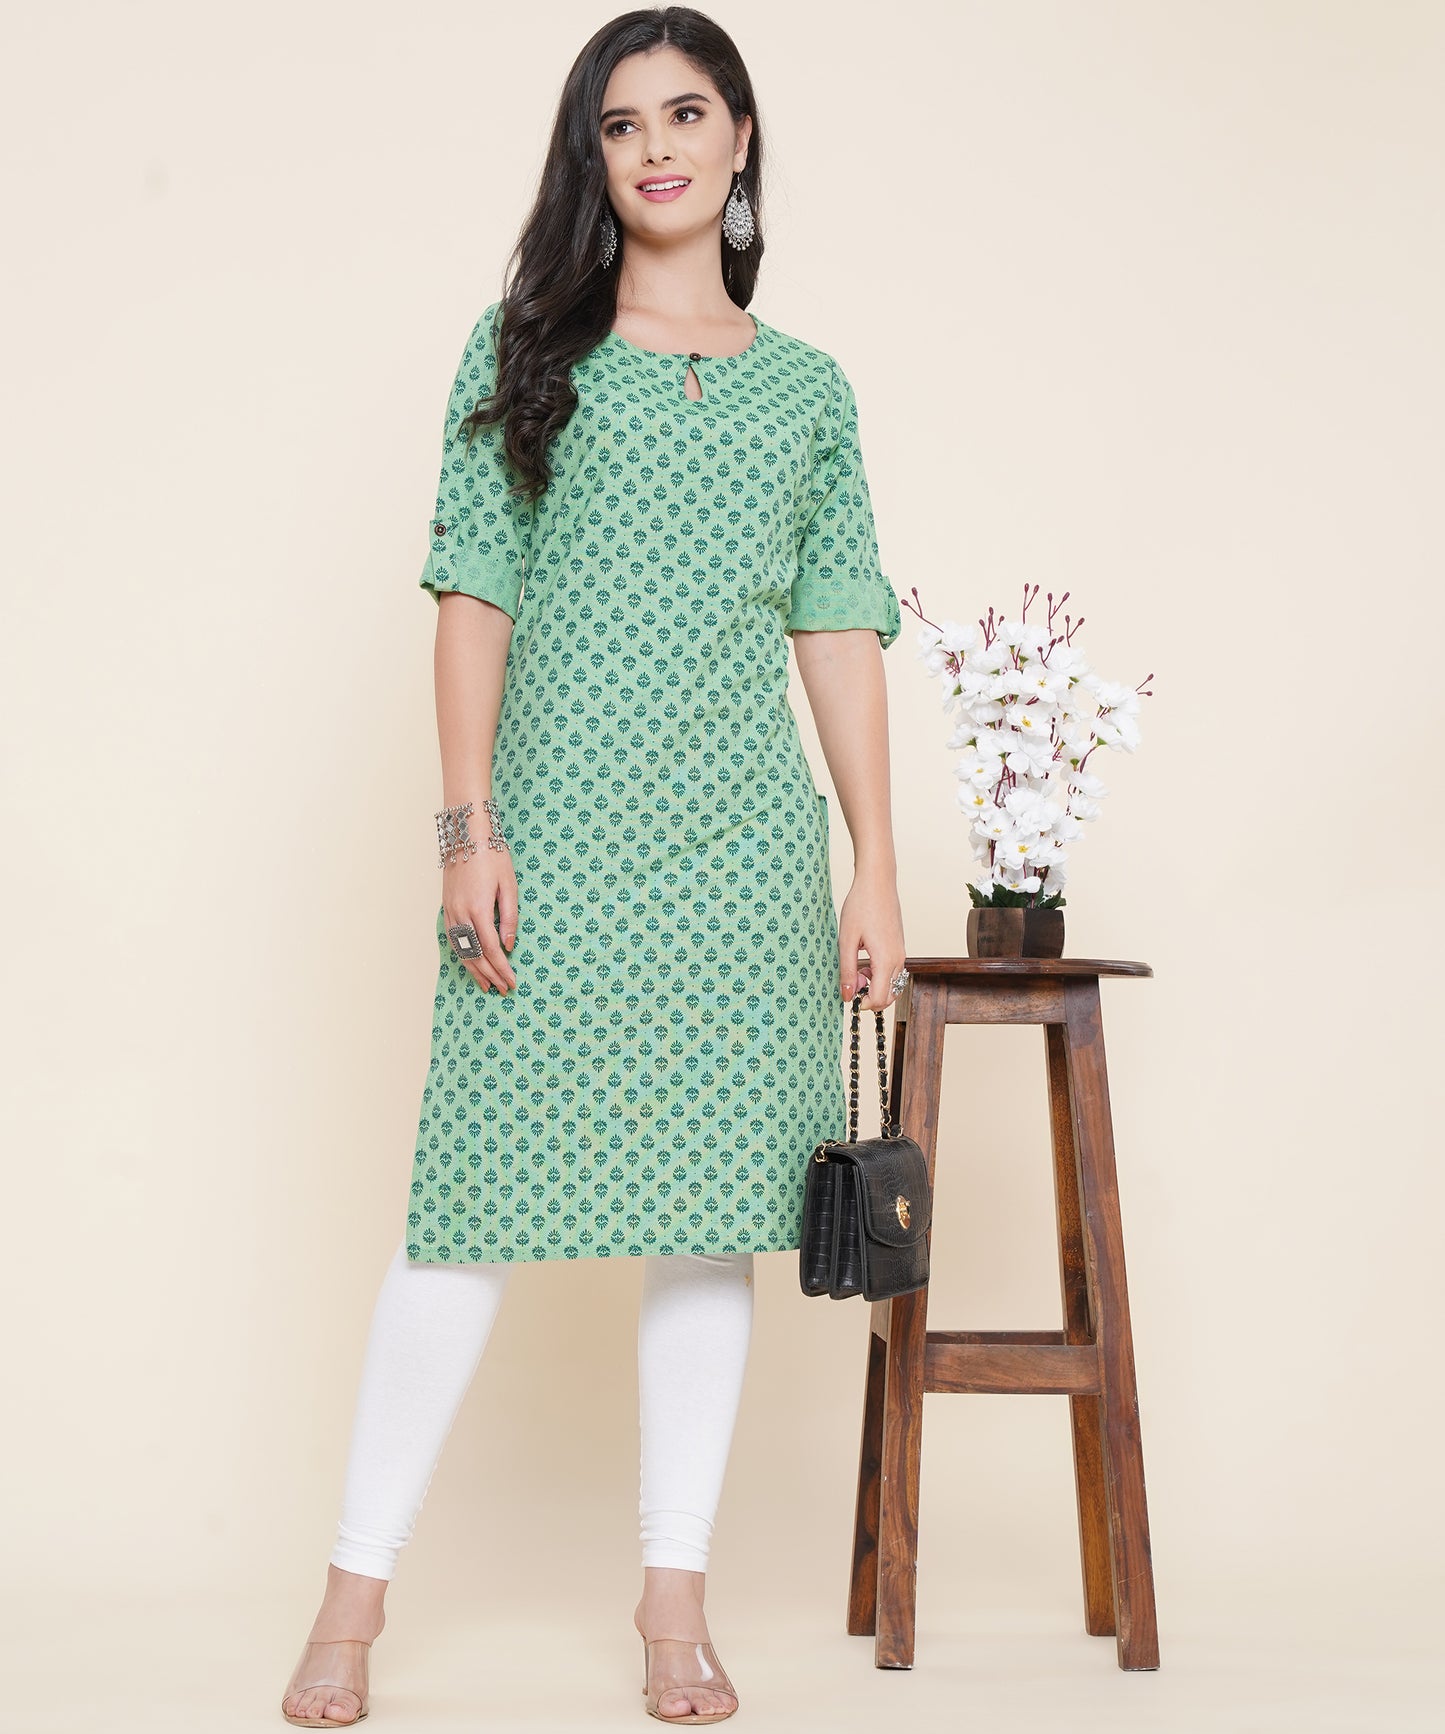 Cotton Printed Kurta Design with Tap Sleeve Button Style, Green